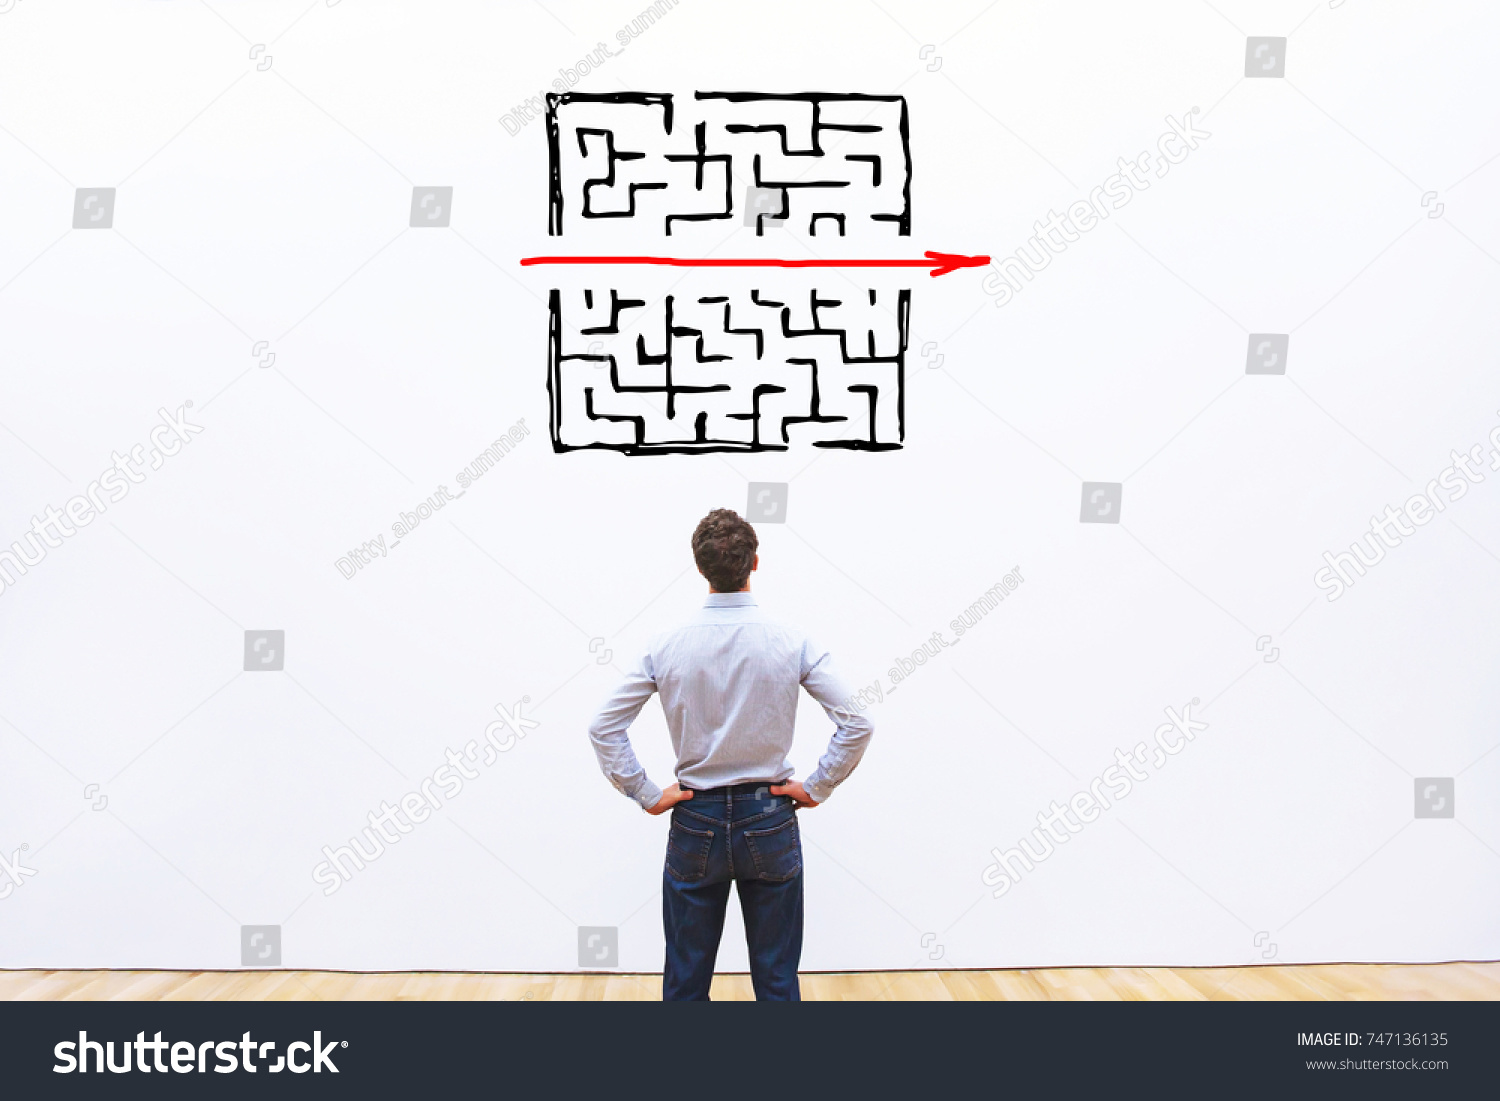 problem and solution concept, business man thinking about exit from complex labyrinth #747136135